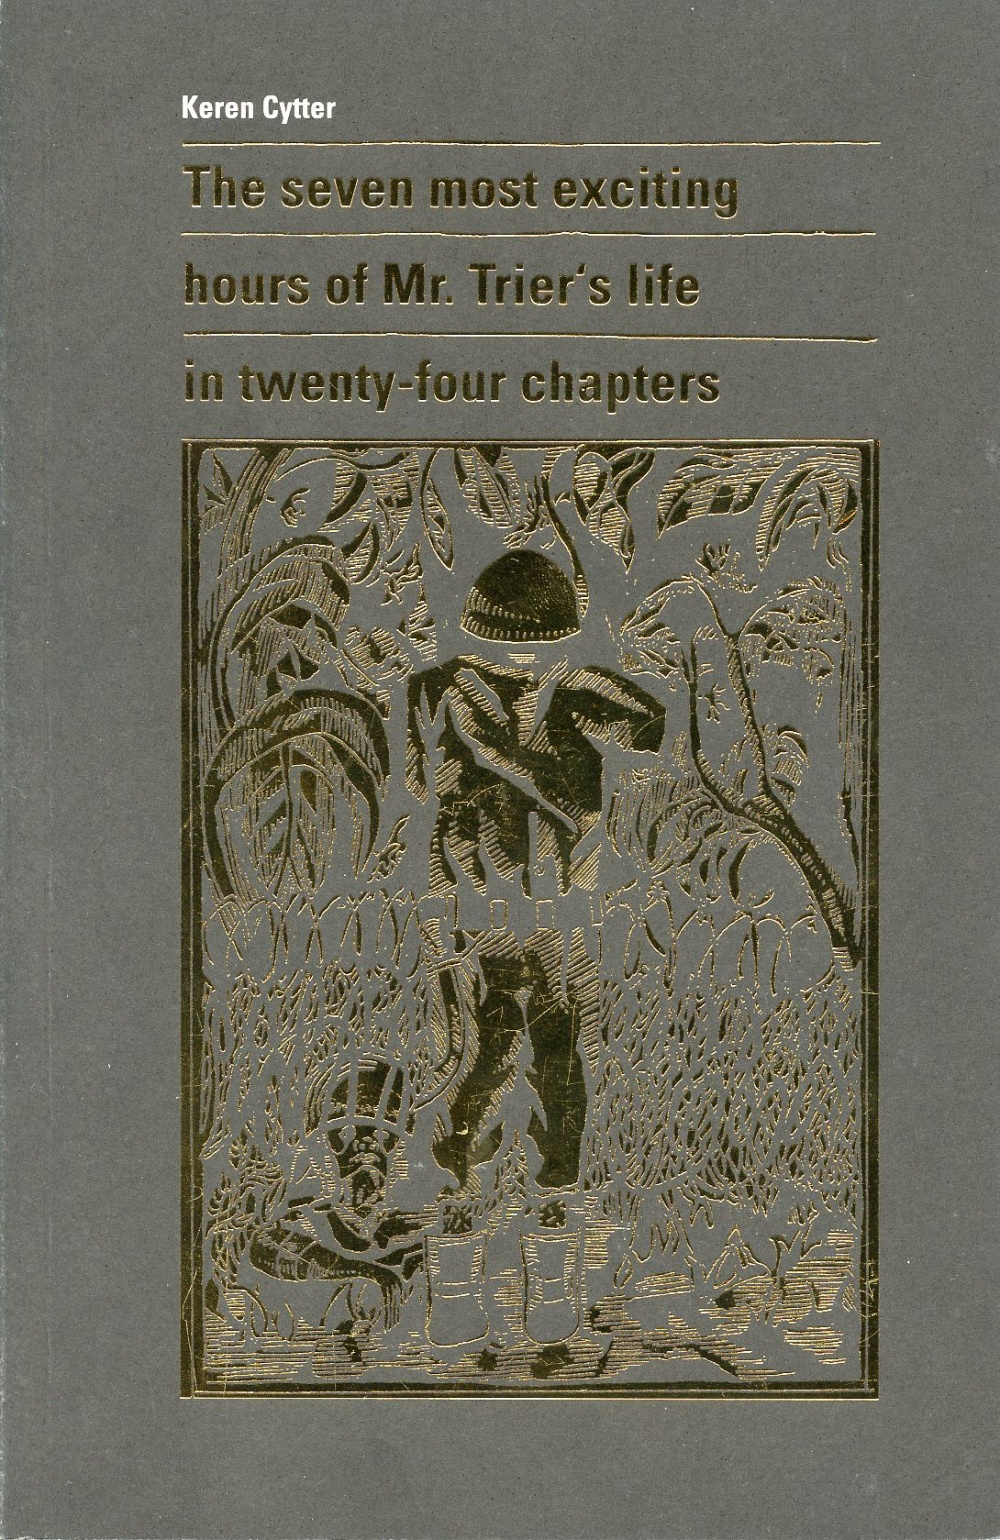 The seven most exciting hours of Mr. Trier’s life in twenty-four